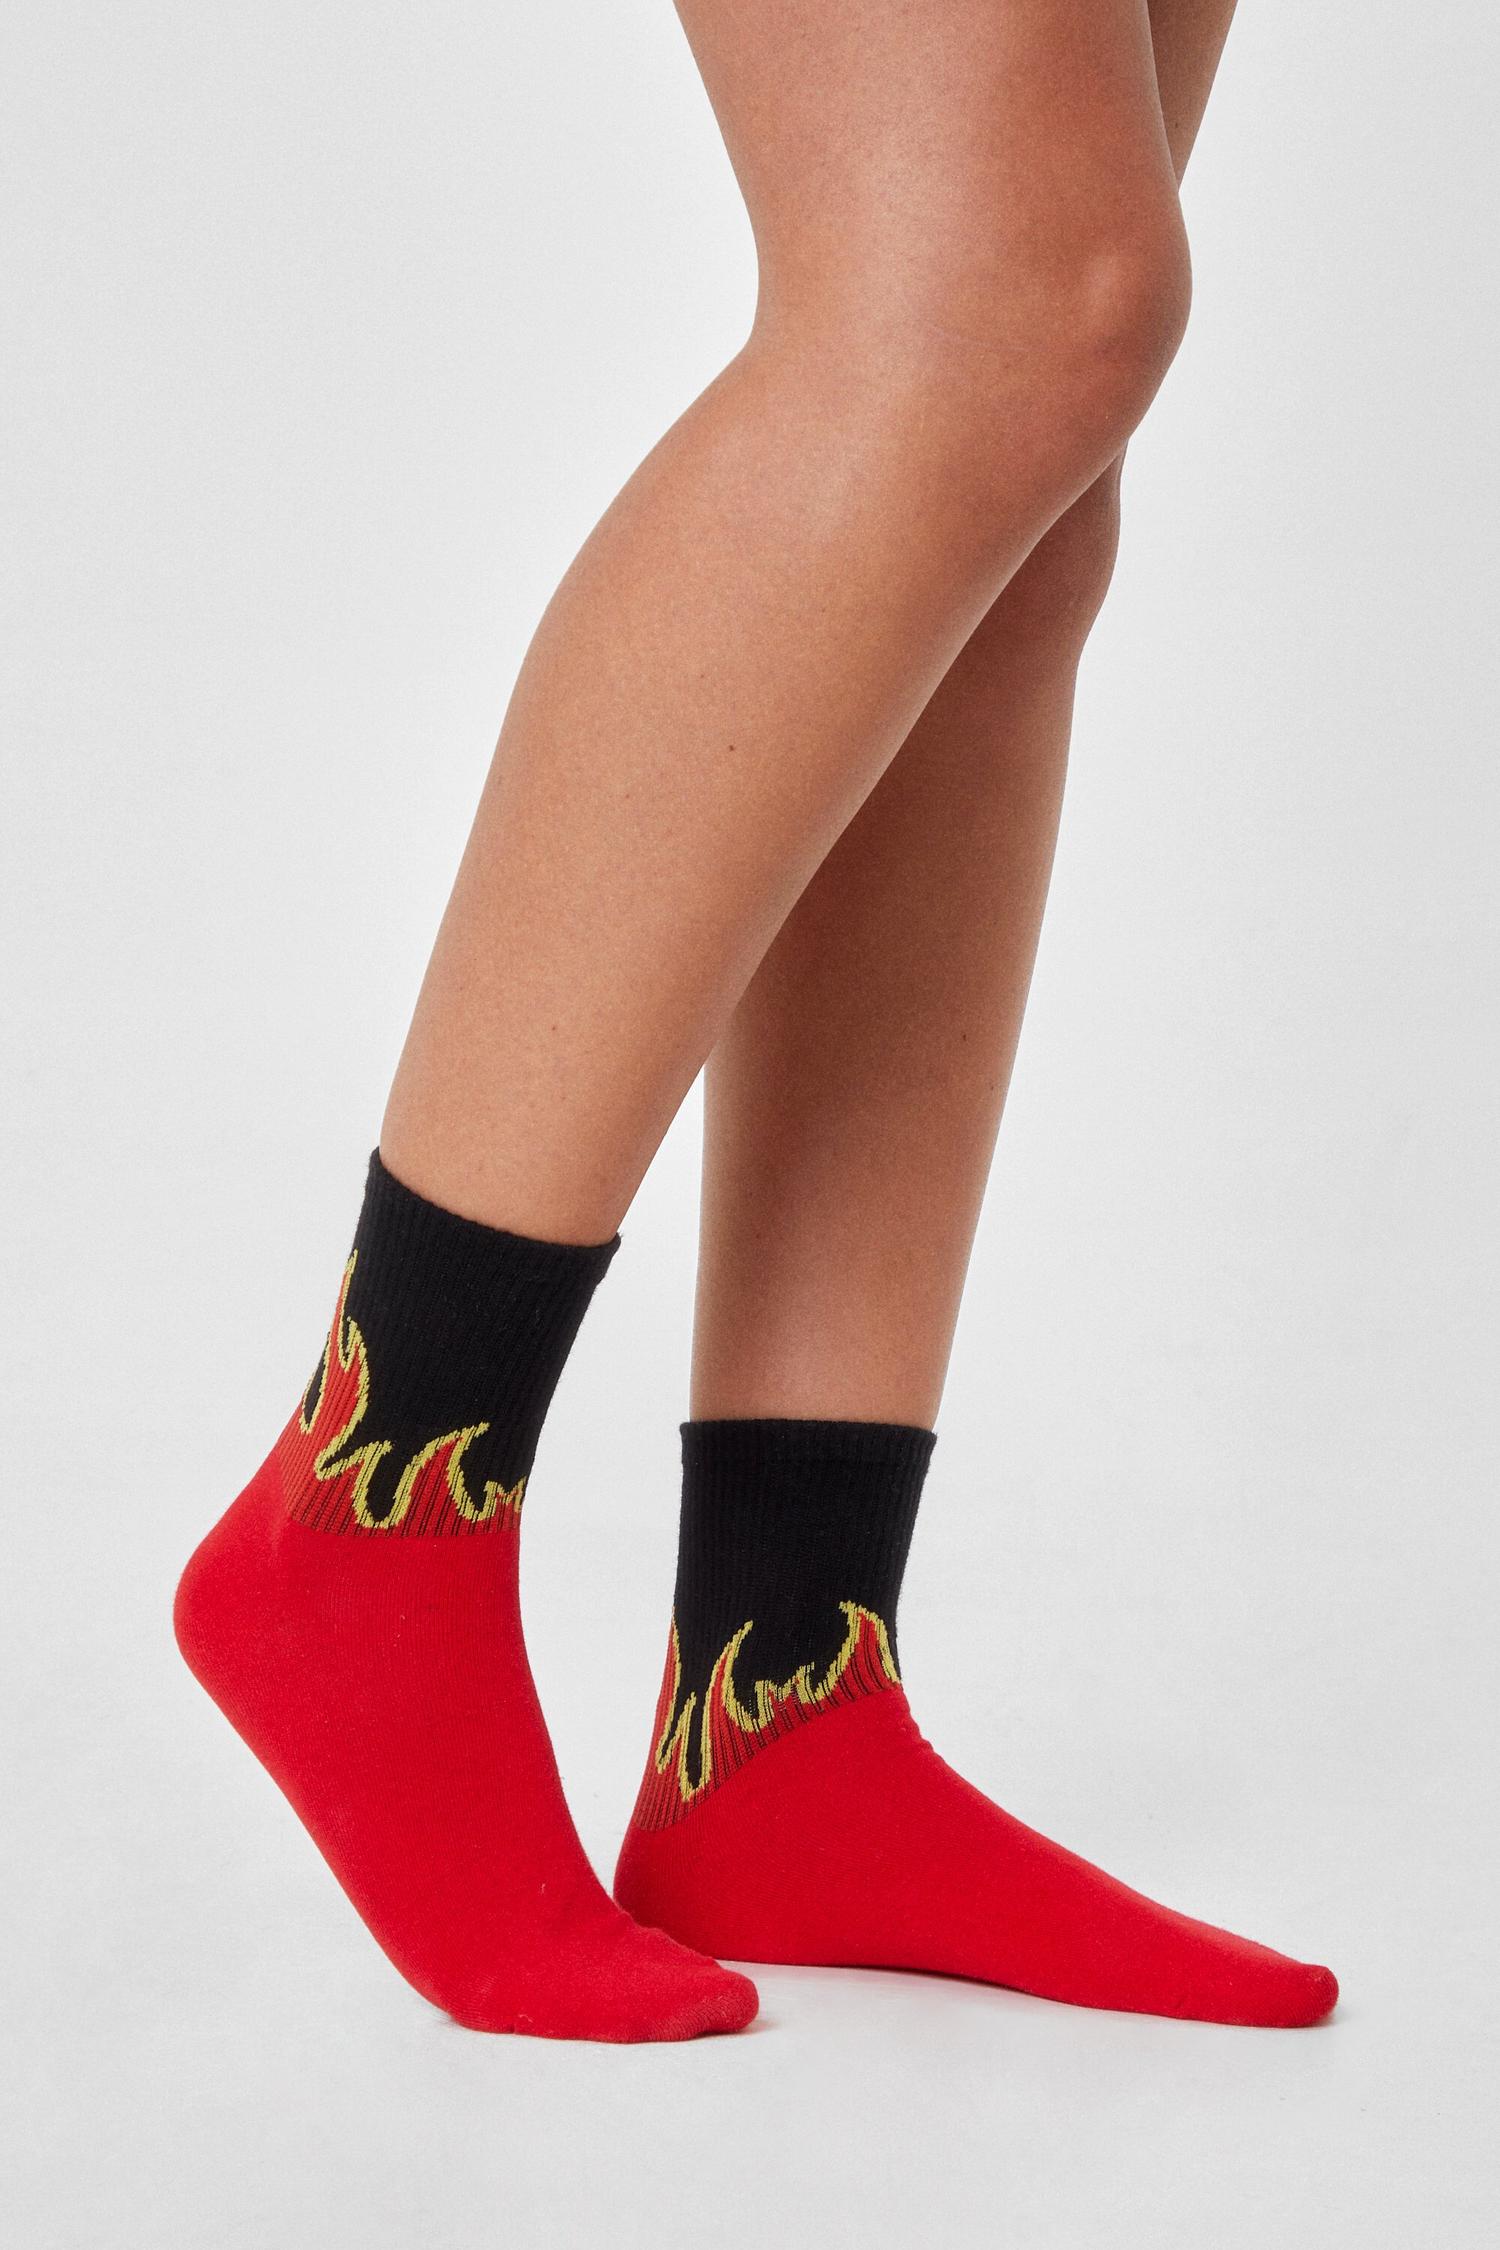 Blow Their Socks Off Graphic Ankle Socks Nasty Gal